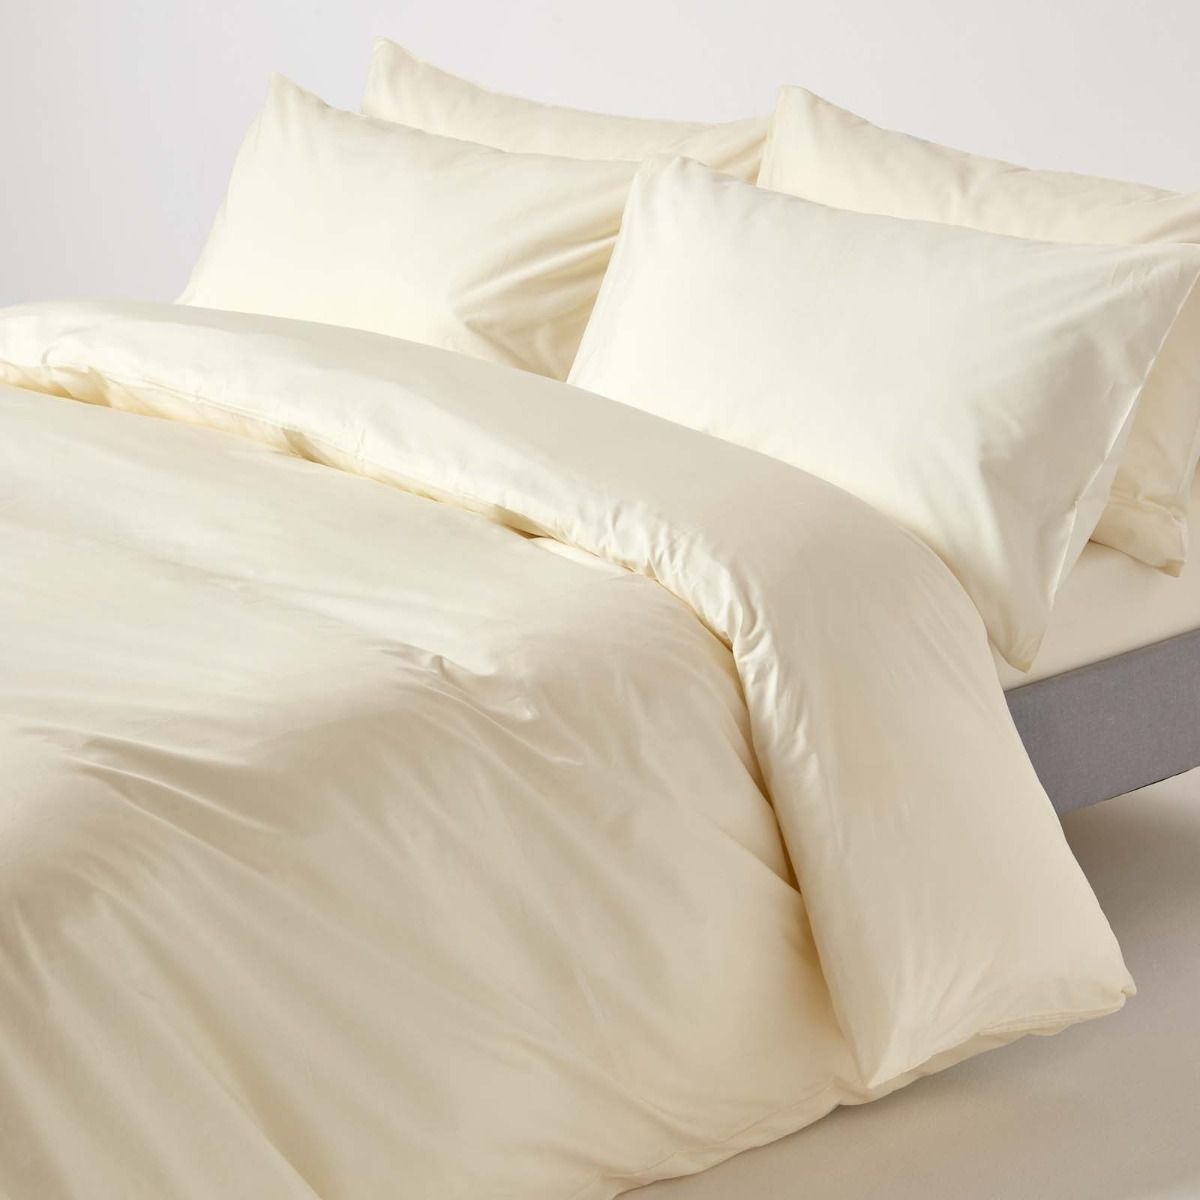 Cream Egyptian Cotton Duvet Cover with Pillowcases 200 Thread count